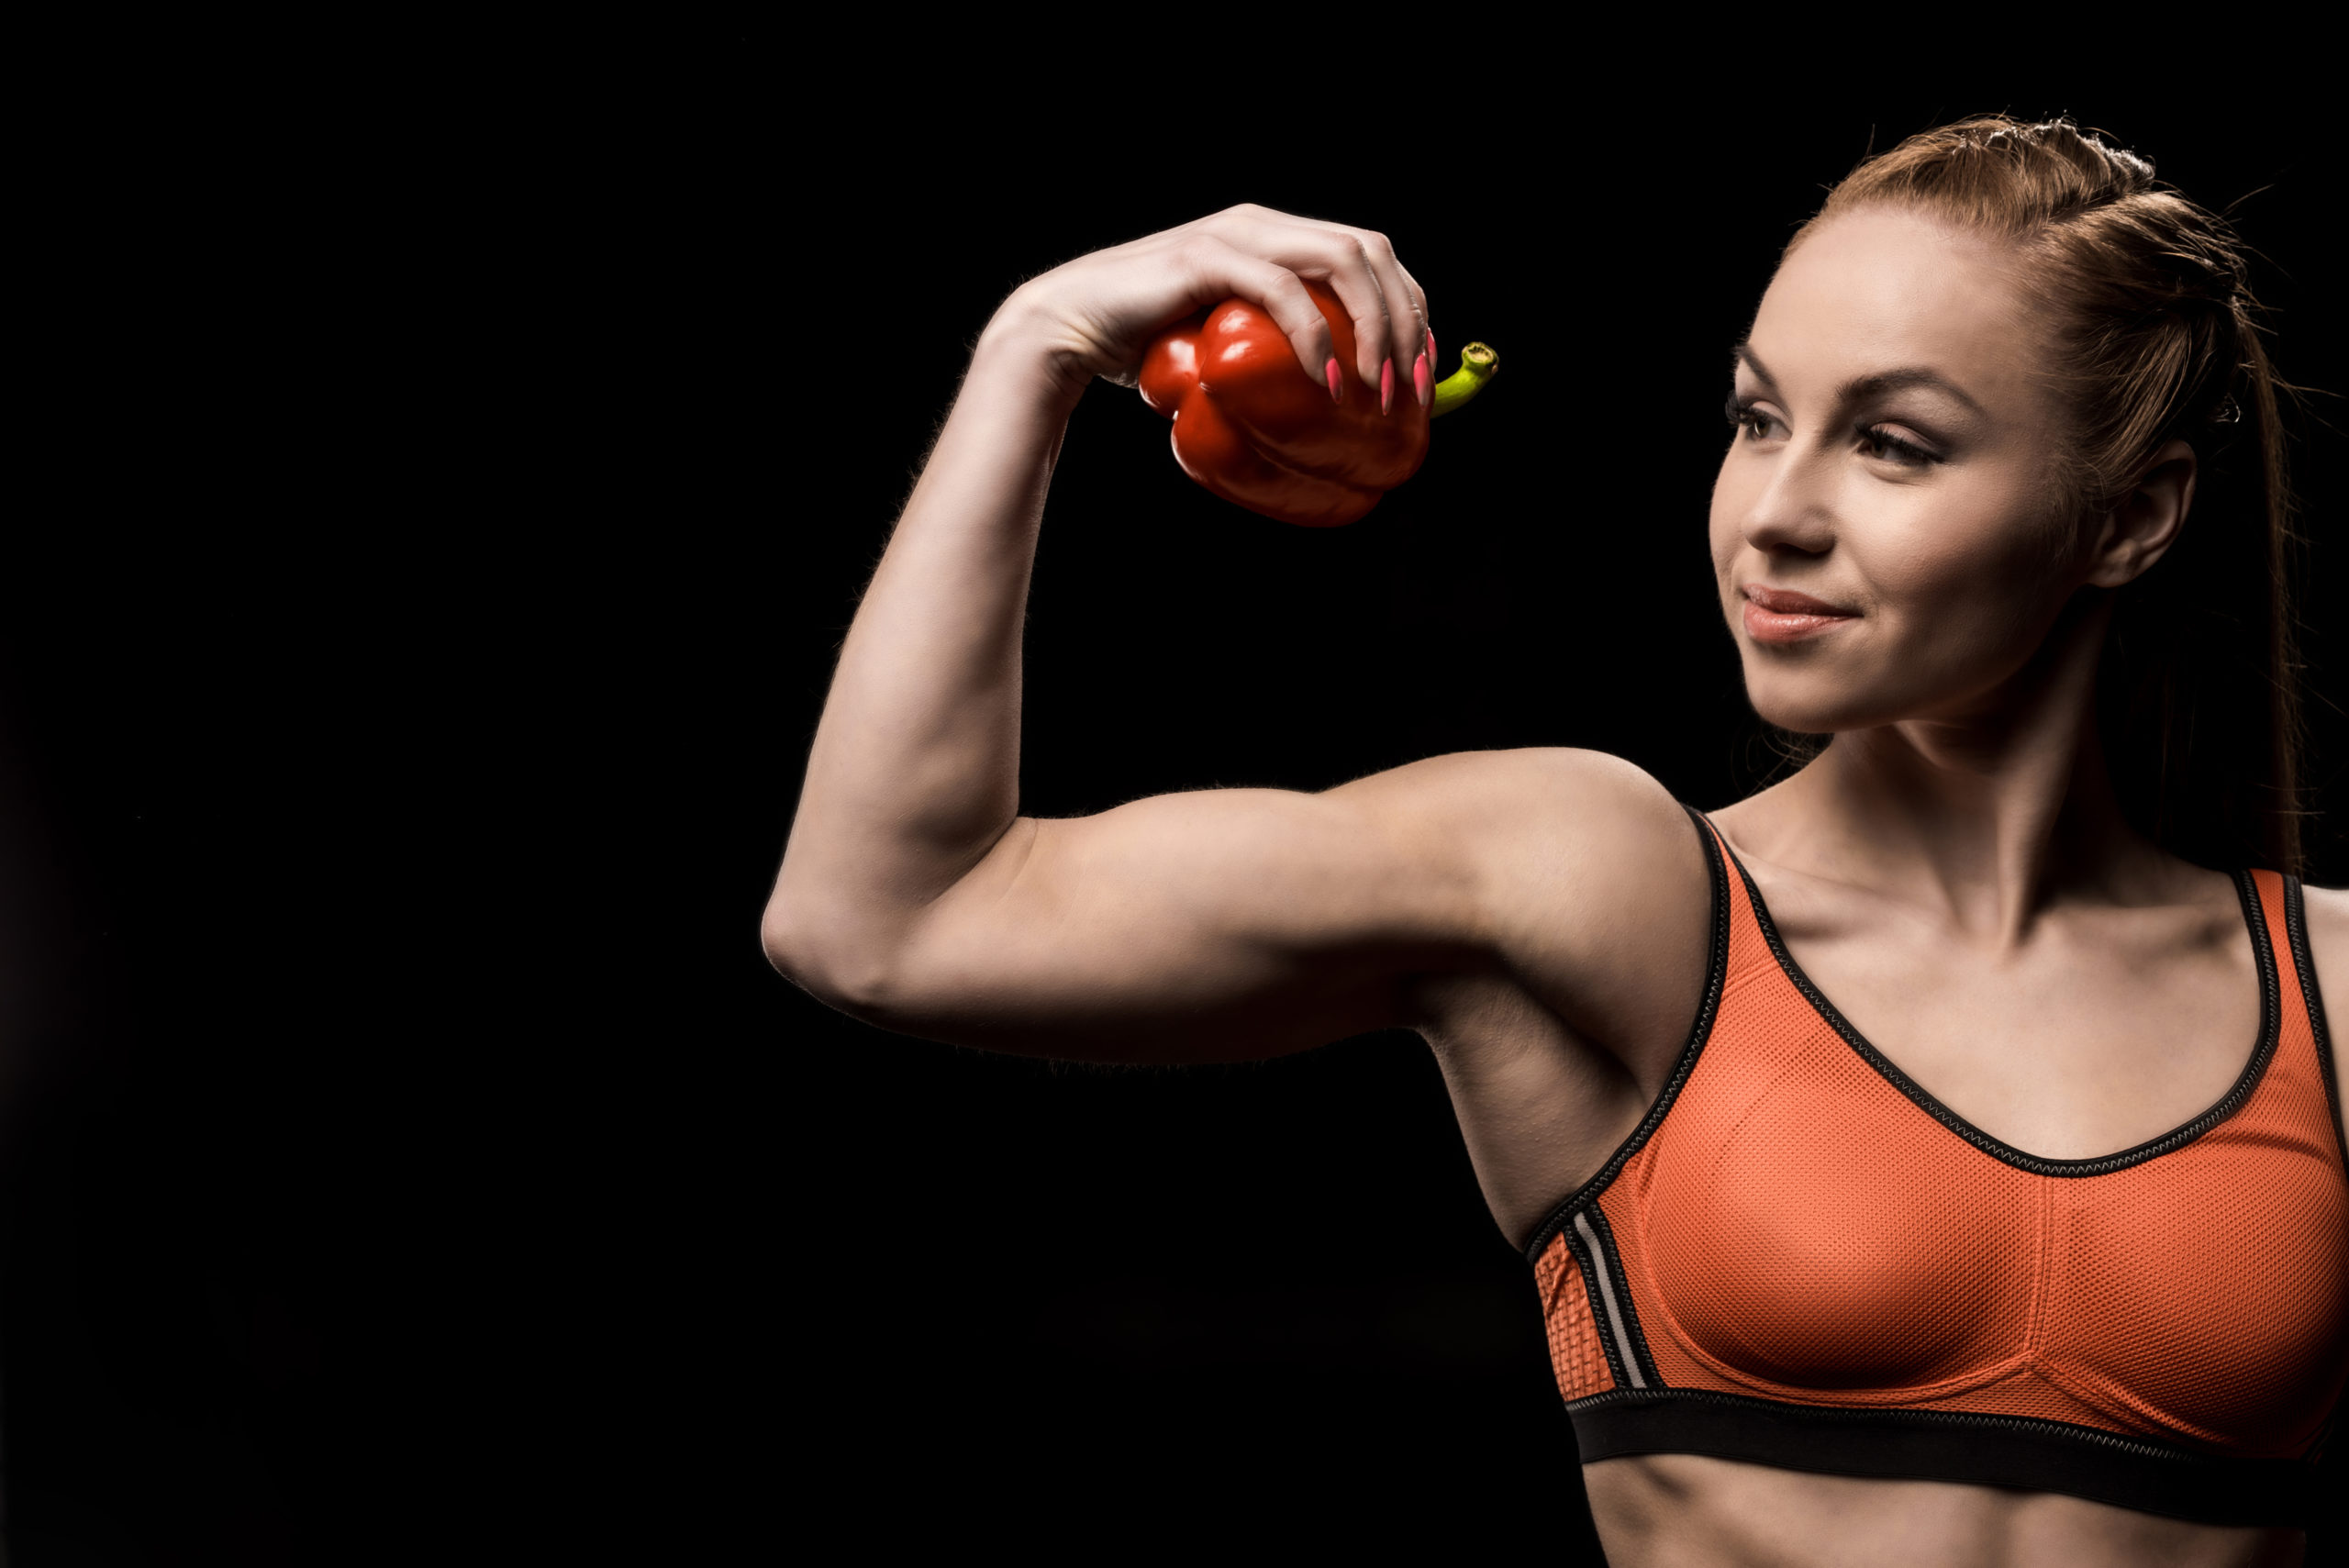 A woman demonstrating her strength by flexing her biceps with healthy food in her hand.